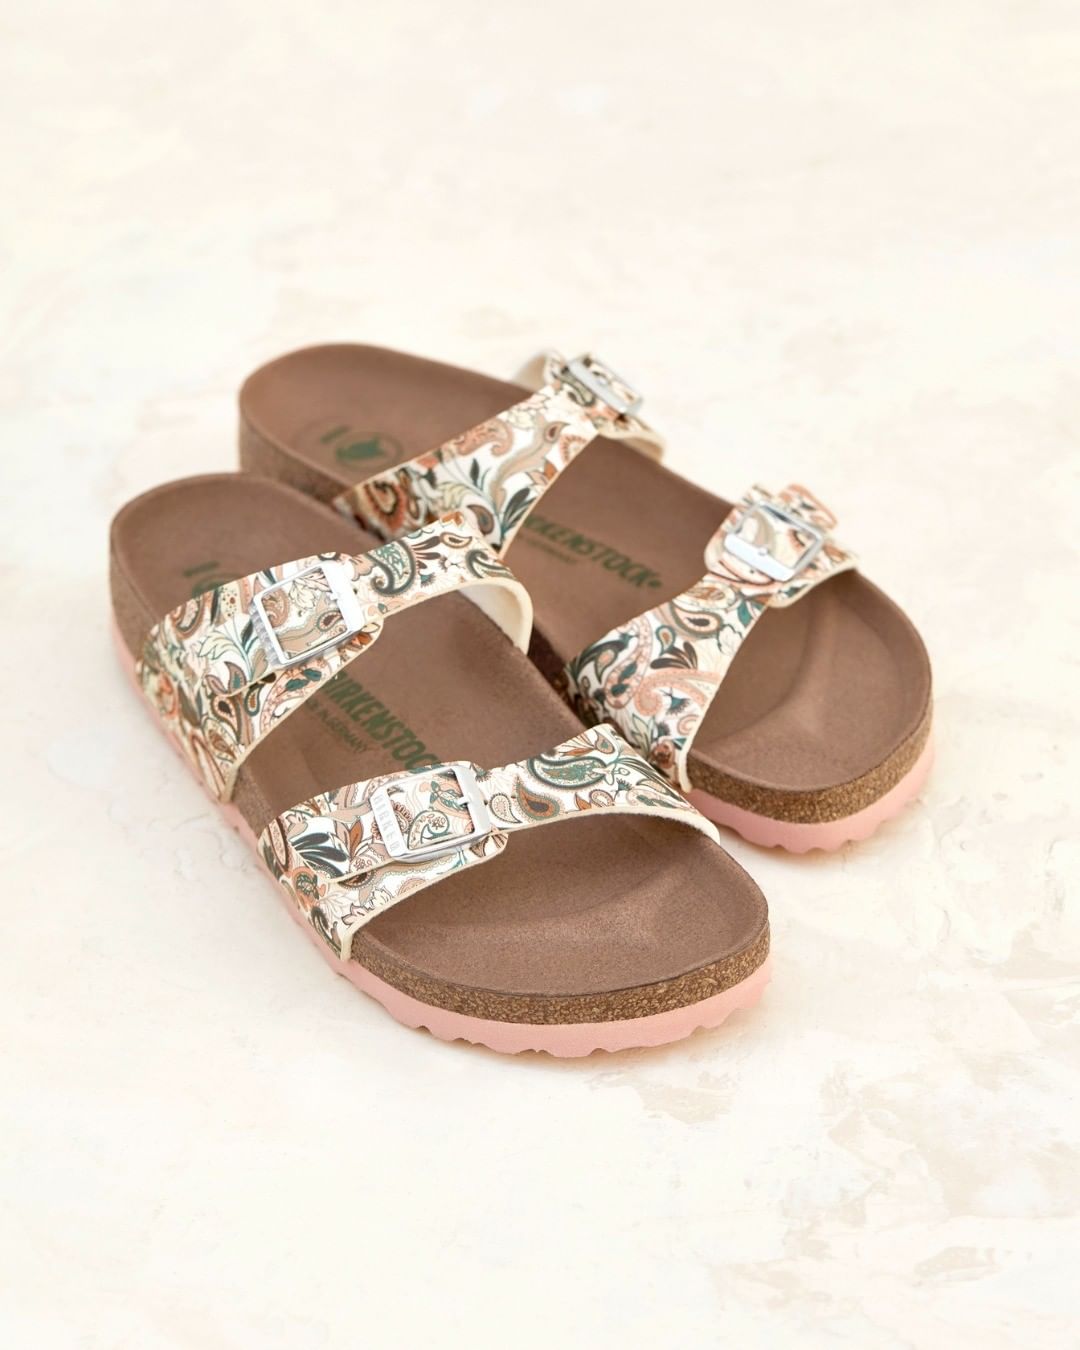 Mother's Day Gifts - Birkenstock Sandals